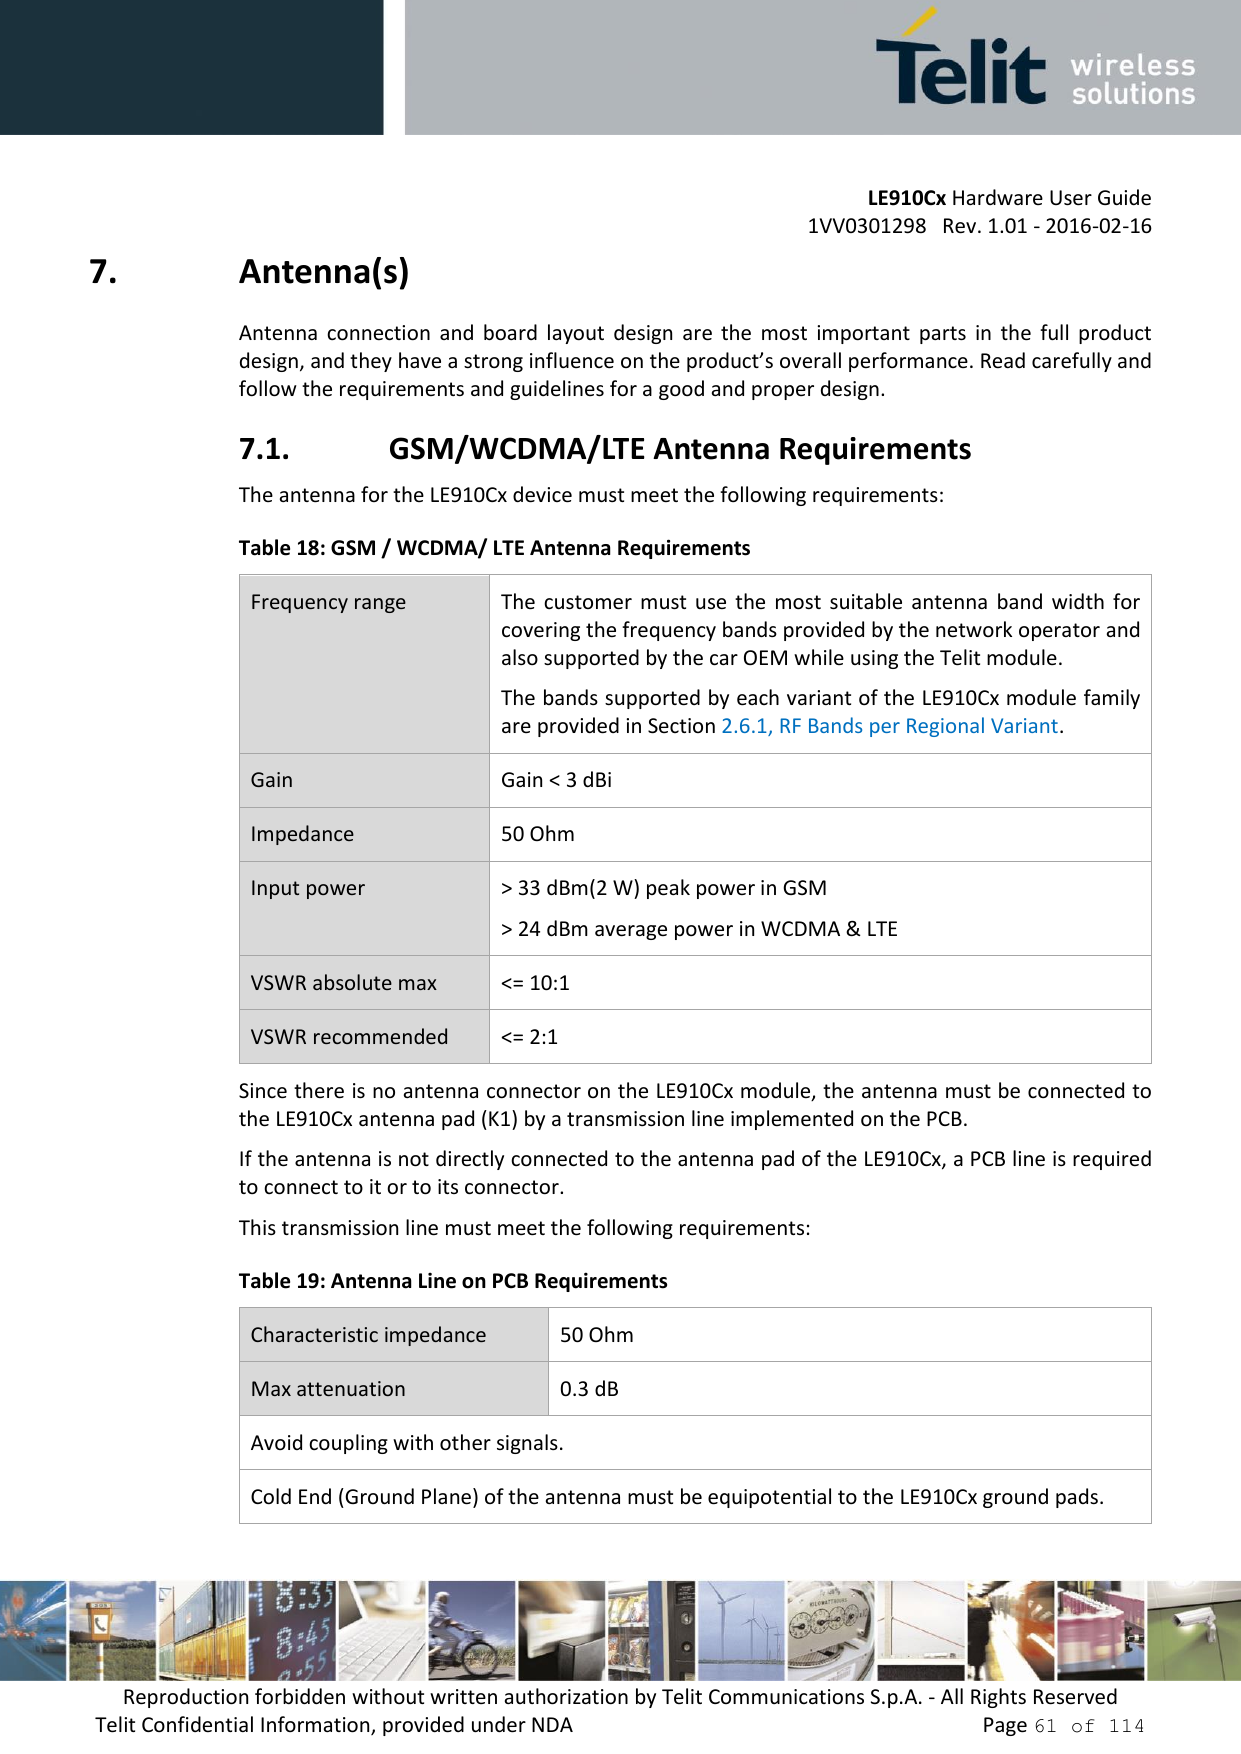         LE910Cx Hardware User Guide     1VV0301298   Rev. 1.01 - 2016-02-16 Reproduction forbidden without written authorization by Telit Communications S.p.A. - All Rights Reserved Telit Confidential Information, provided under NDA                 Page 61 of 114 7. Antenna(s) Antenna  connection  and  board  layout  design  are  the  most  important  parts  in  the  full  product design, and they have a strong influence on the product’s overall performance. Read carefully and follow the requirements and guidelines for a good and proper design. 7.1. GSM/WCDMA/LTE Antenna Requirements The antenna for the LE910Cx device must meet the following requirements: Table 18: GSM / WCDMA/ LTE Antenna Requirements Frequency range The  customer  must  use  the most  suitable  antenna  band  width  for covering the frequency bands provided by the network operator and also supported by the car OEM while using the Telit module.  The bands supported by each variant of the LE910Cx module family are provided in Section 2.6.1, RF Bands per Regional Variant. Gain Gain &lt; 3 dBi Impedance 50 Ohm Input power &gt; 33 dBm(2 W) peak power in GSM &gt; 24 dBm average power in WCDMA &amp; LTE VSWR absolute max &lt;= 10:1 VSWR recommended &lt;= 2:1 Since there is no antenna connector on the LE910Cx module, the antenna must be connected to the LE910Cx antenna pad (K1) by a transmission line implemented on the PCB. If the antenna is not directly connected to the antenna pad of the LE910Cx, a PCB line is required to connect to it or to its connector. This transmission line must meet the following requirements: Table 19: Antenna Line on PCB Requirements Characteristic impedance 50 Ohm Max attenuation 0.3 dB Avoid coupling with other signals. Cold End (Ground Plane) of the antenna must be equipotential to the LE910Cx ground pads. 